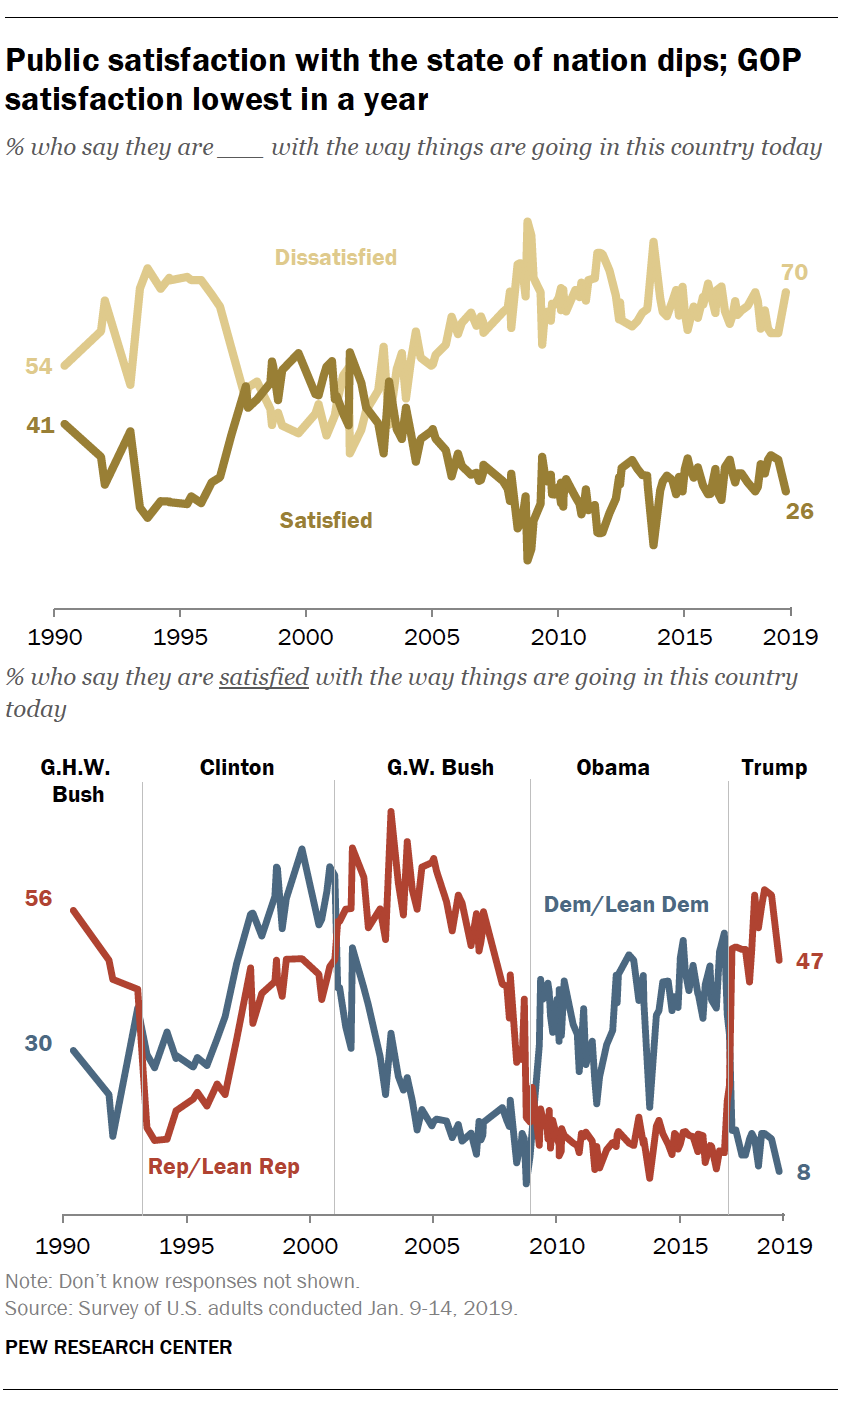 Public satisfaction with the state of nation dips; GOP satisfaction lowest in a year